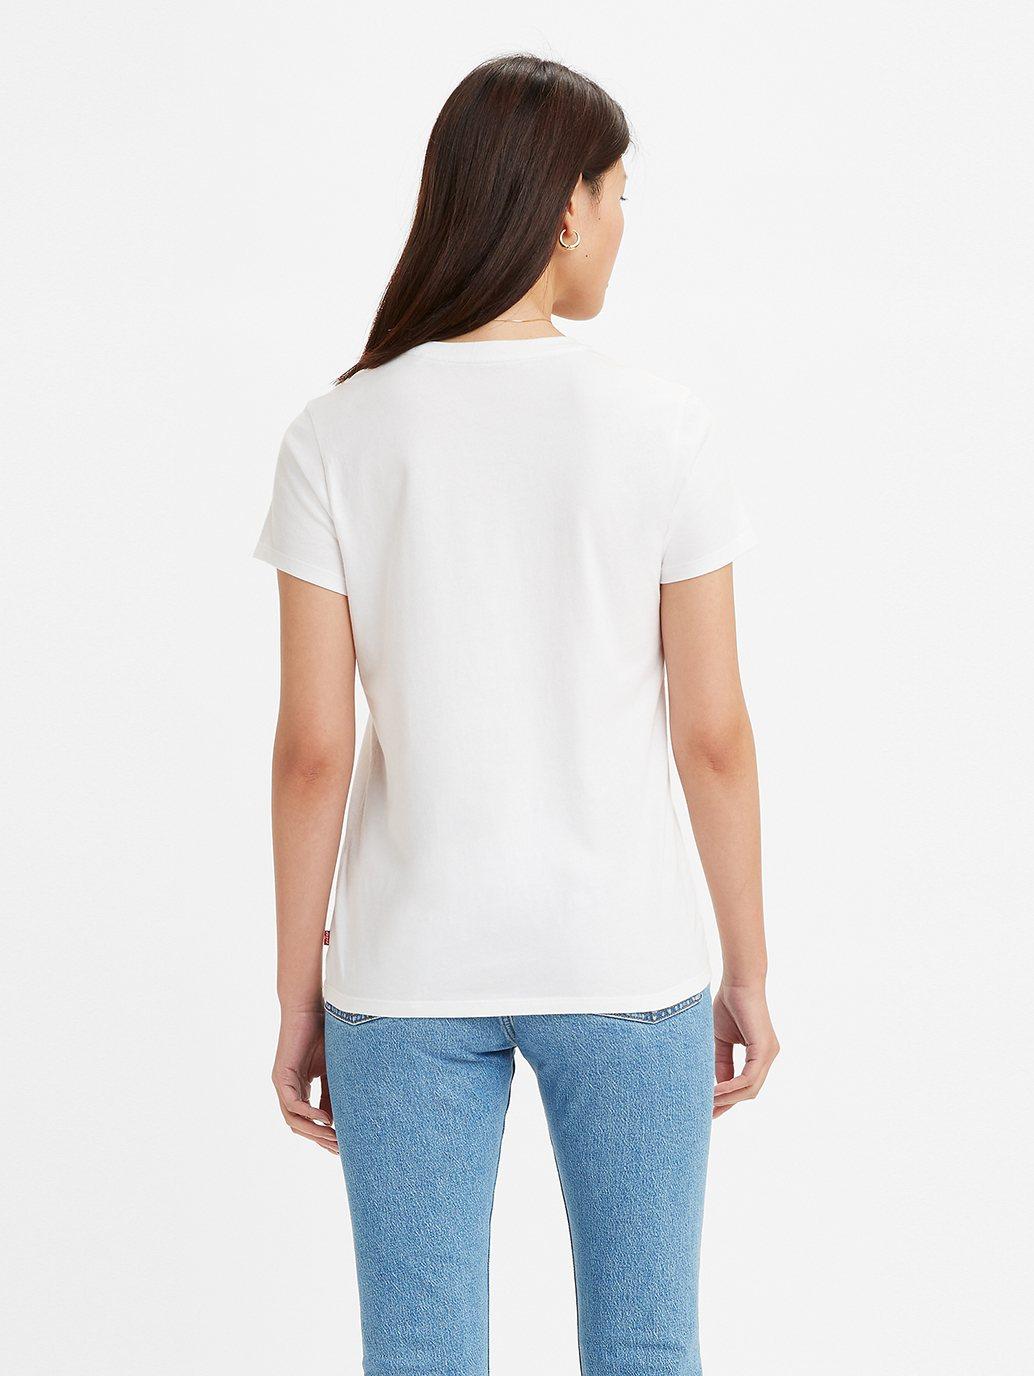 levis malaysia womens perfect t shirt 173691921 02 Back